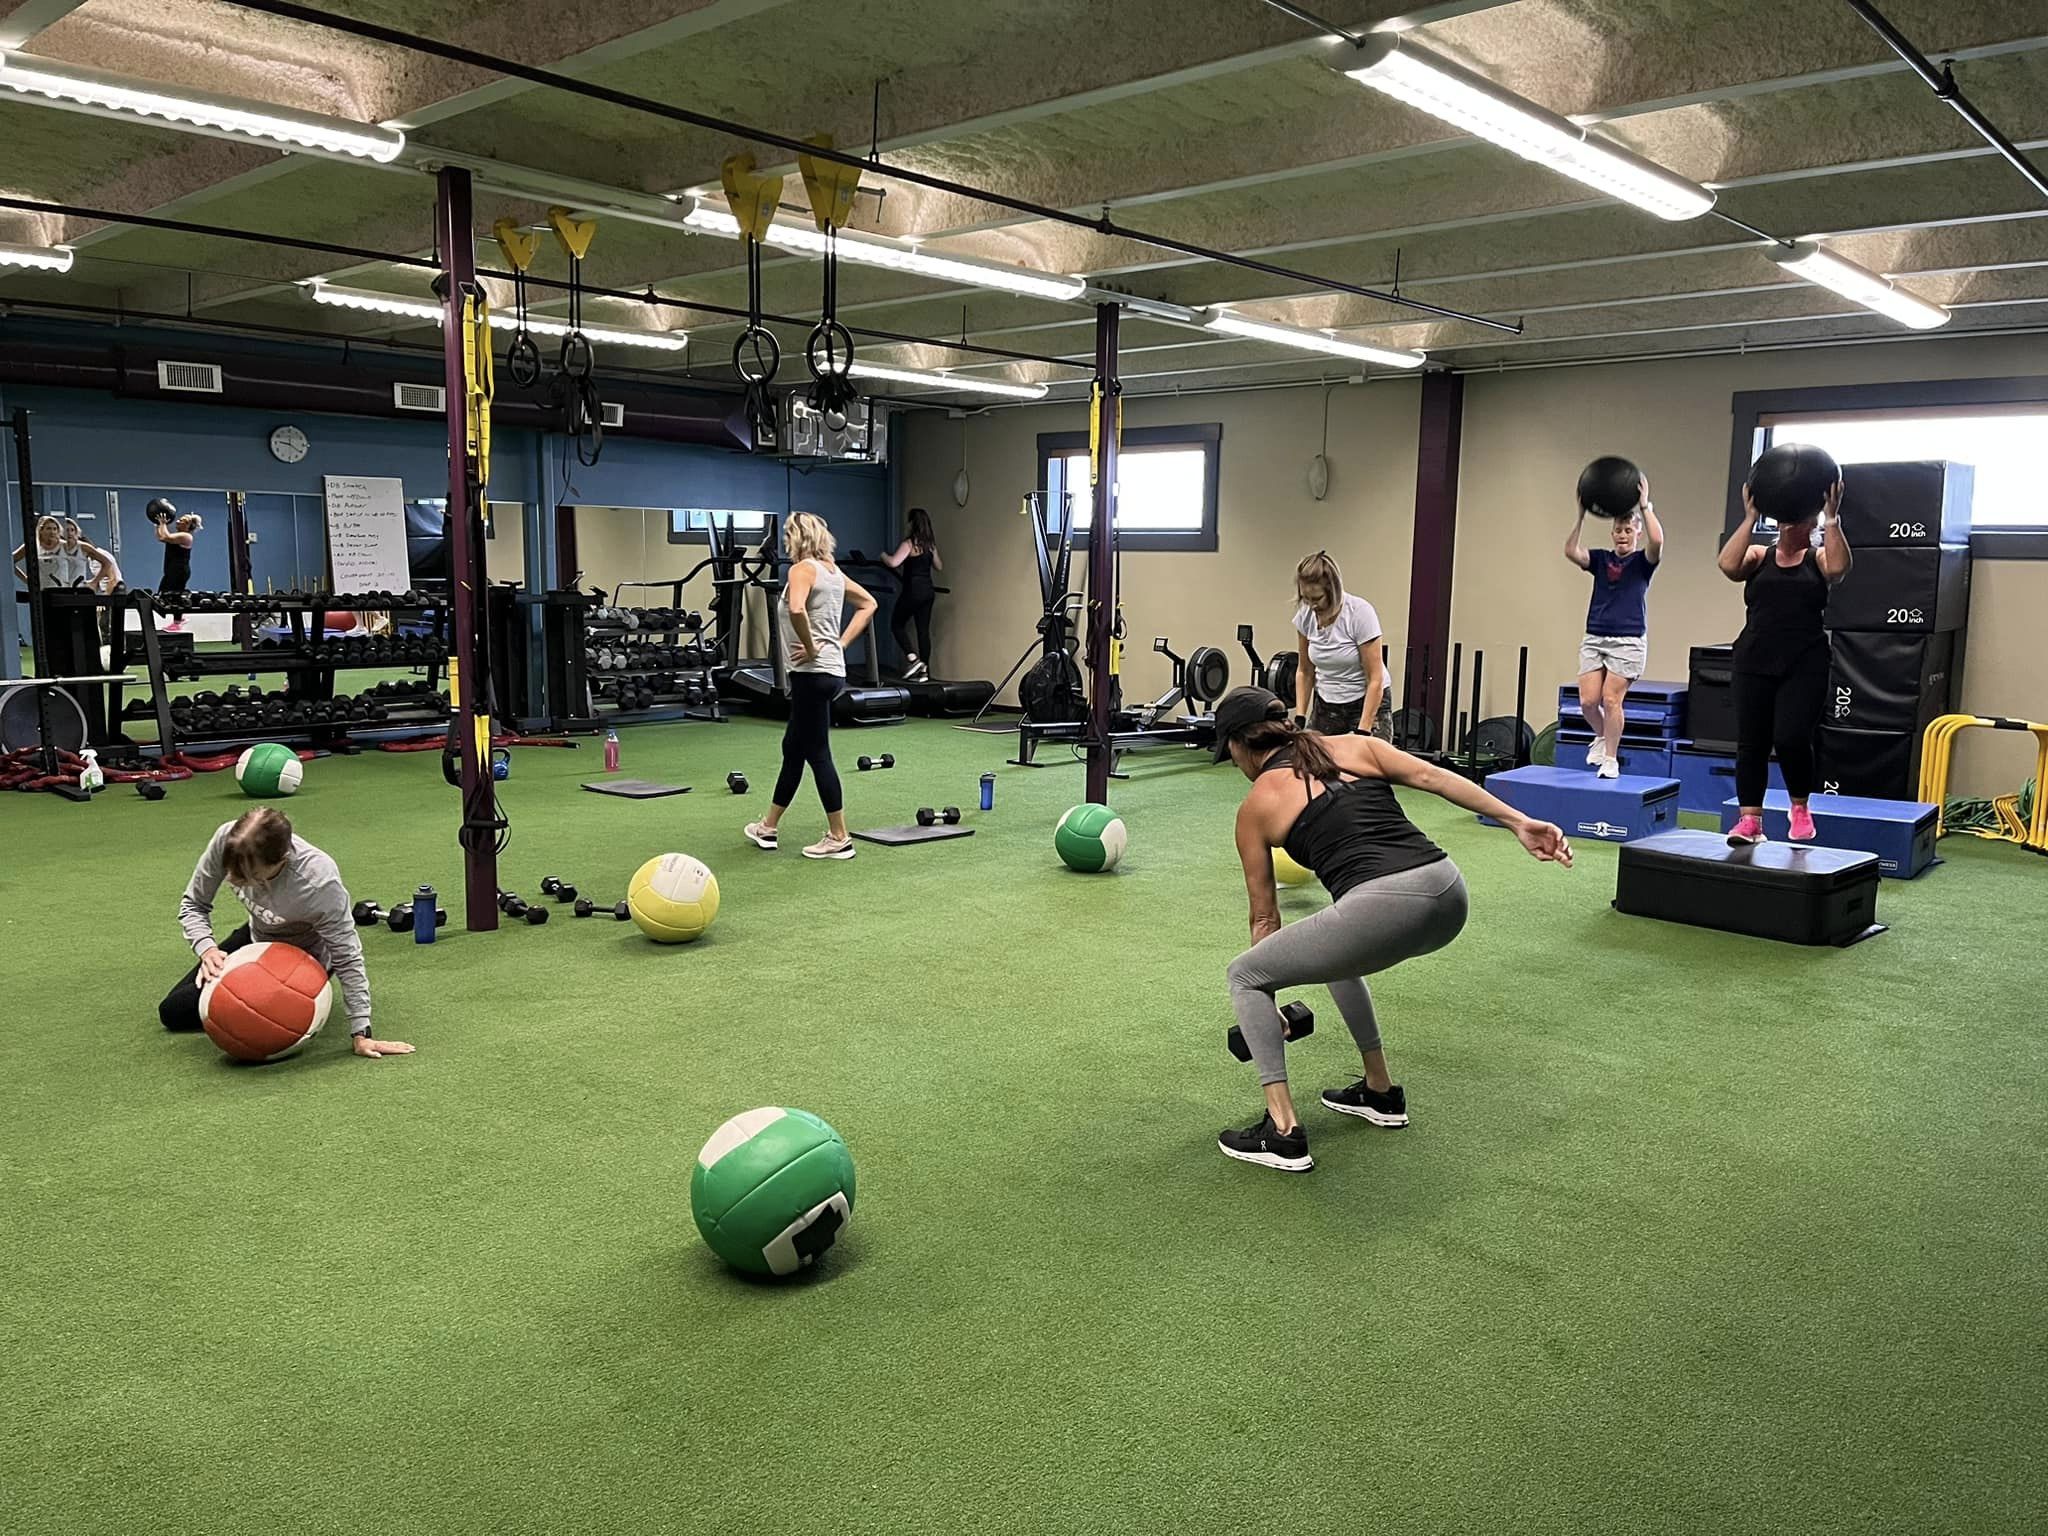 Group of fitness enthusiasts taking a class.